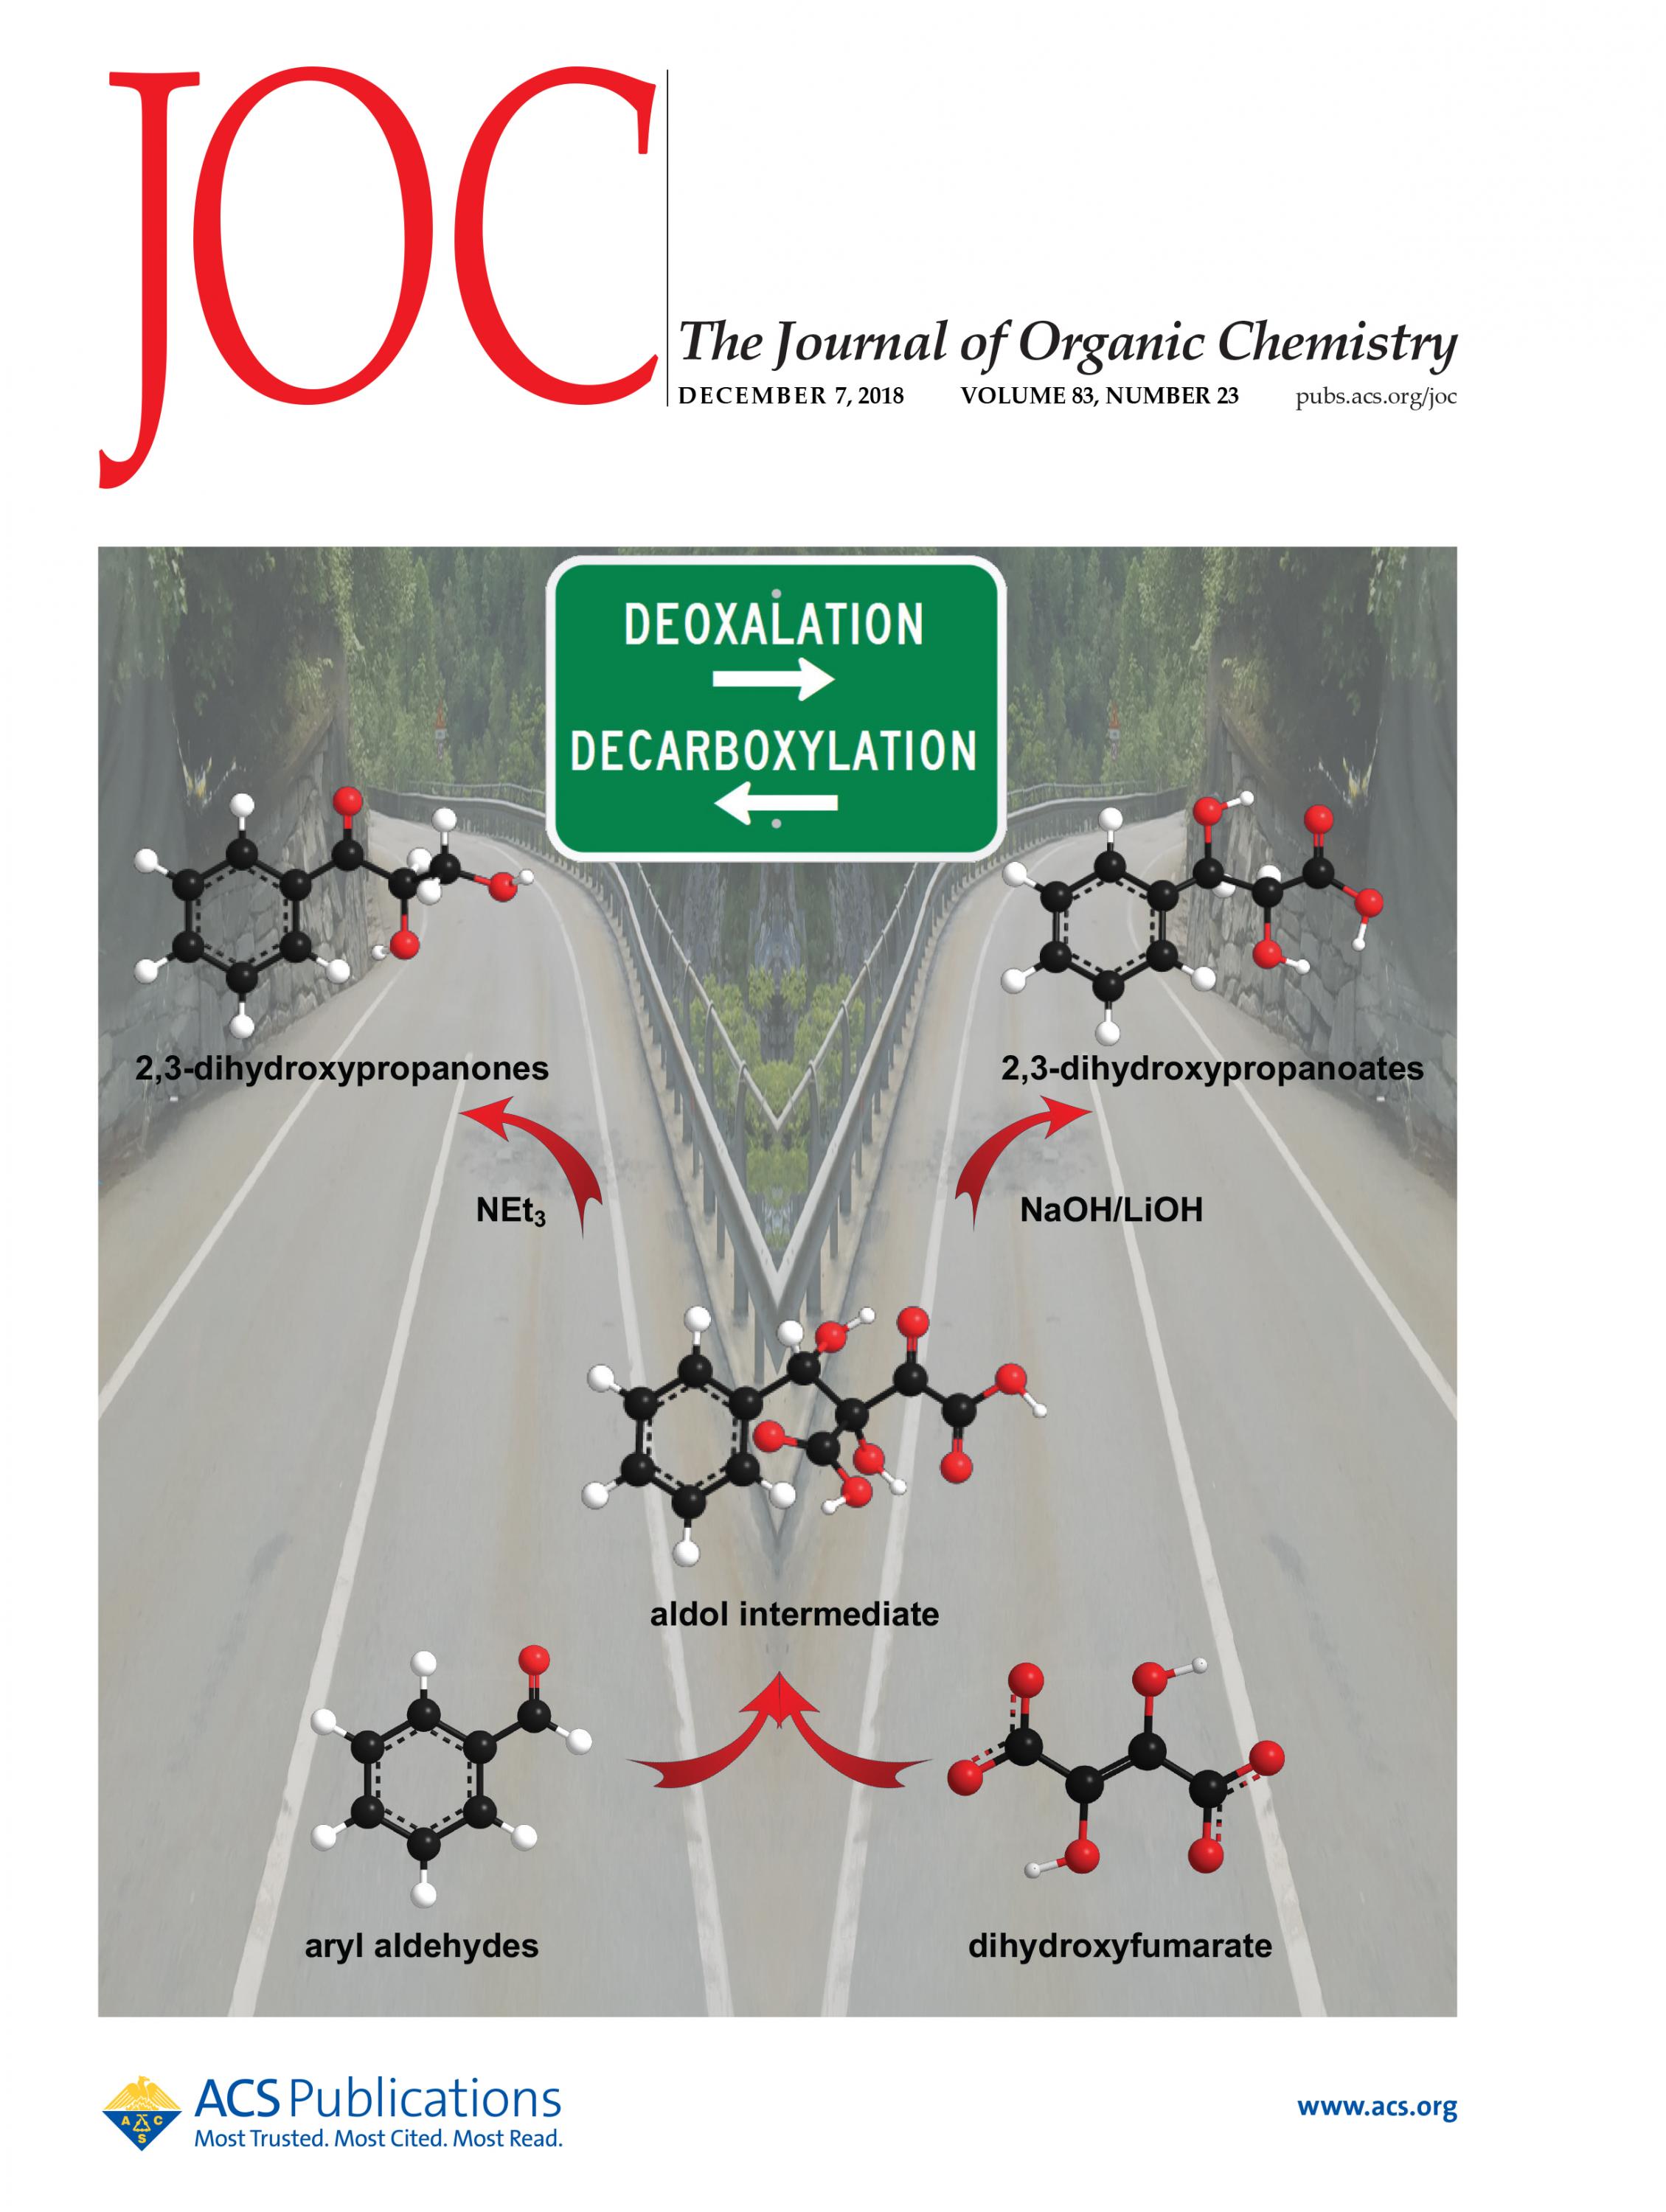 The Journal of Organic Chemistry, December 2018 cover (Courtesy ACS Publications)